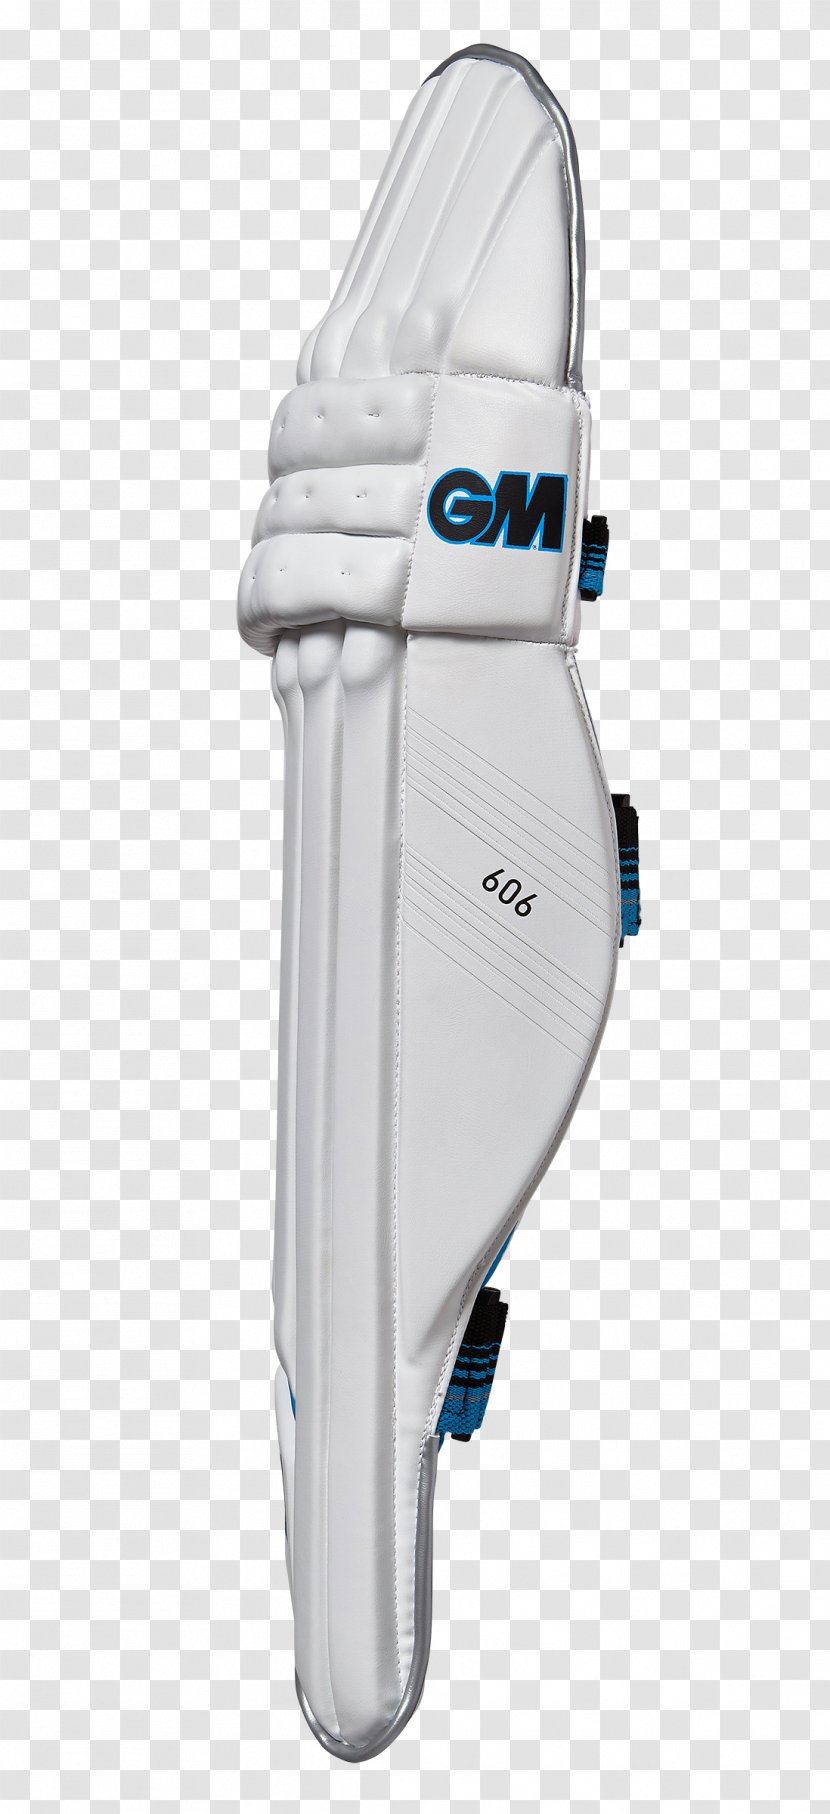 Protective Gear In Sports Pads Cricket General Motors Batting - Electric Blue - Personal Equipment Transparent PNG